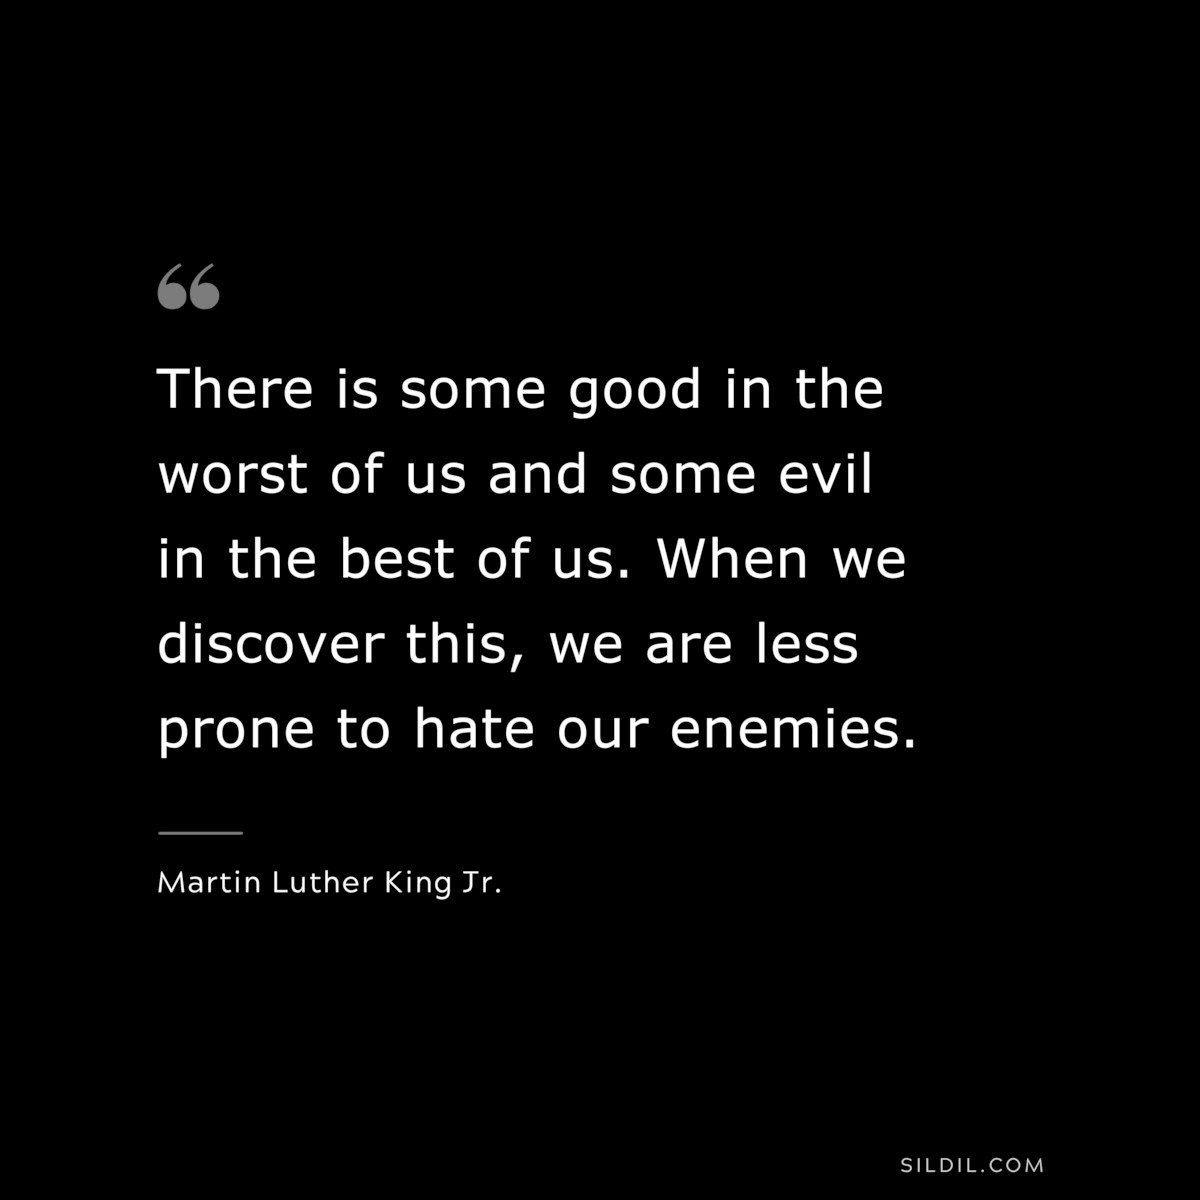 There is some good in the worst of us and some evil in the best of us. When we discover this, we are less prone to hate our enemies. ― Martin Luther King Jr.